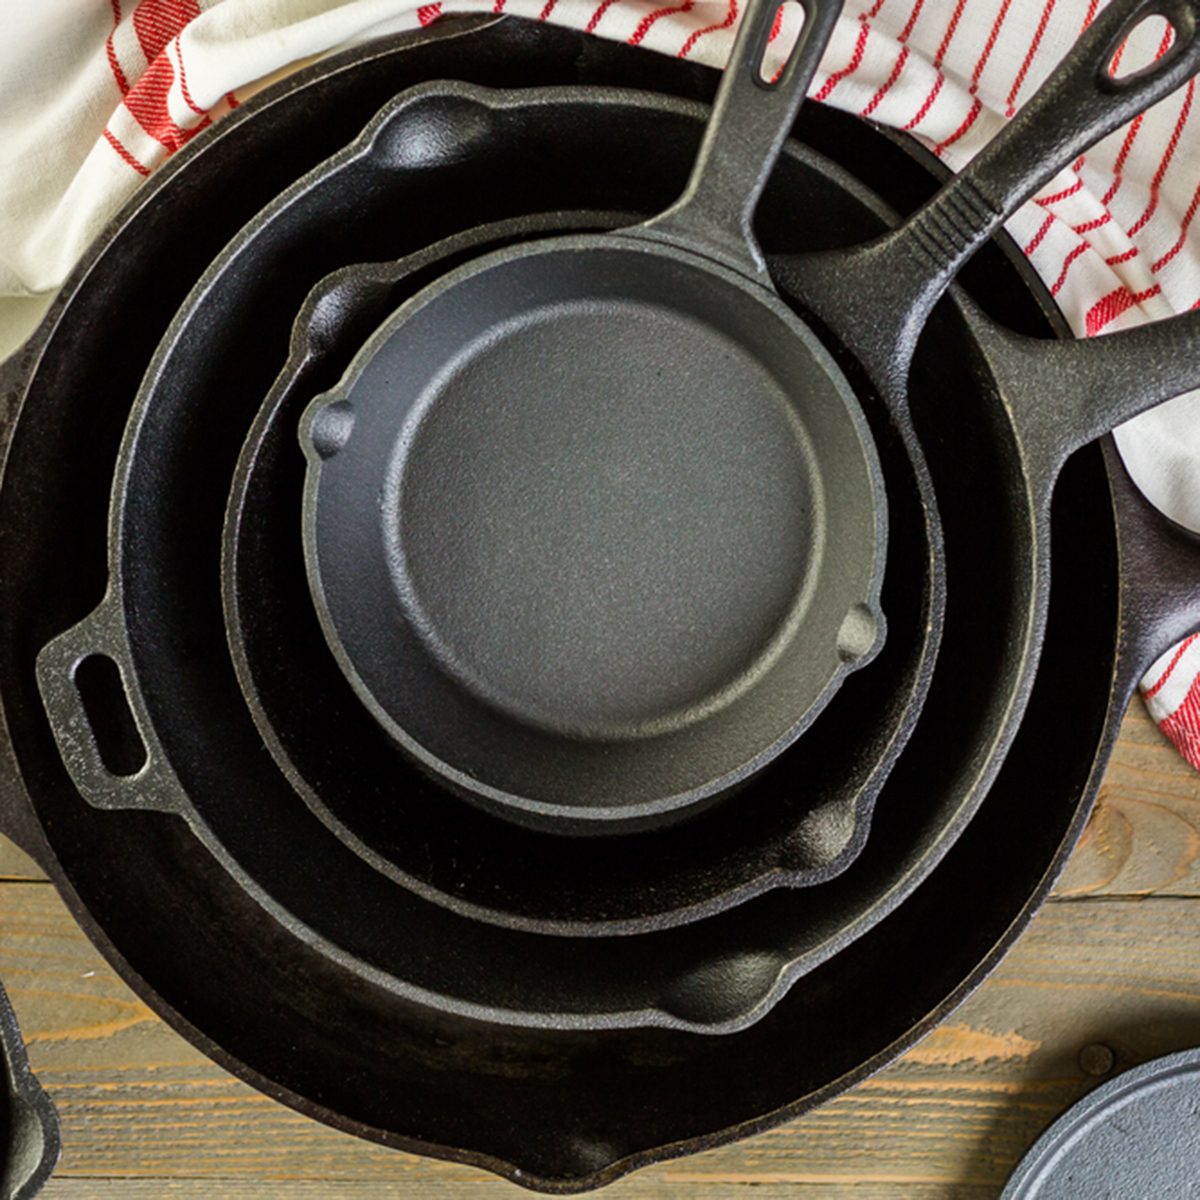 Our Test Kitchen's Favorite Cast Iron Scrubbers